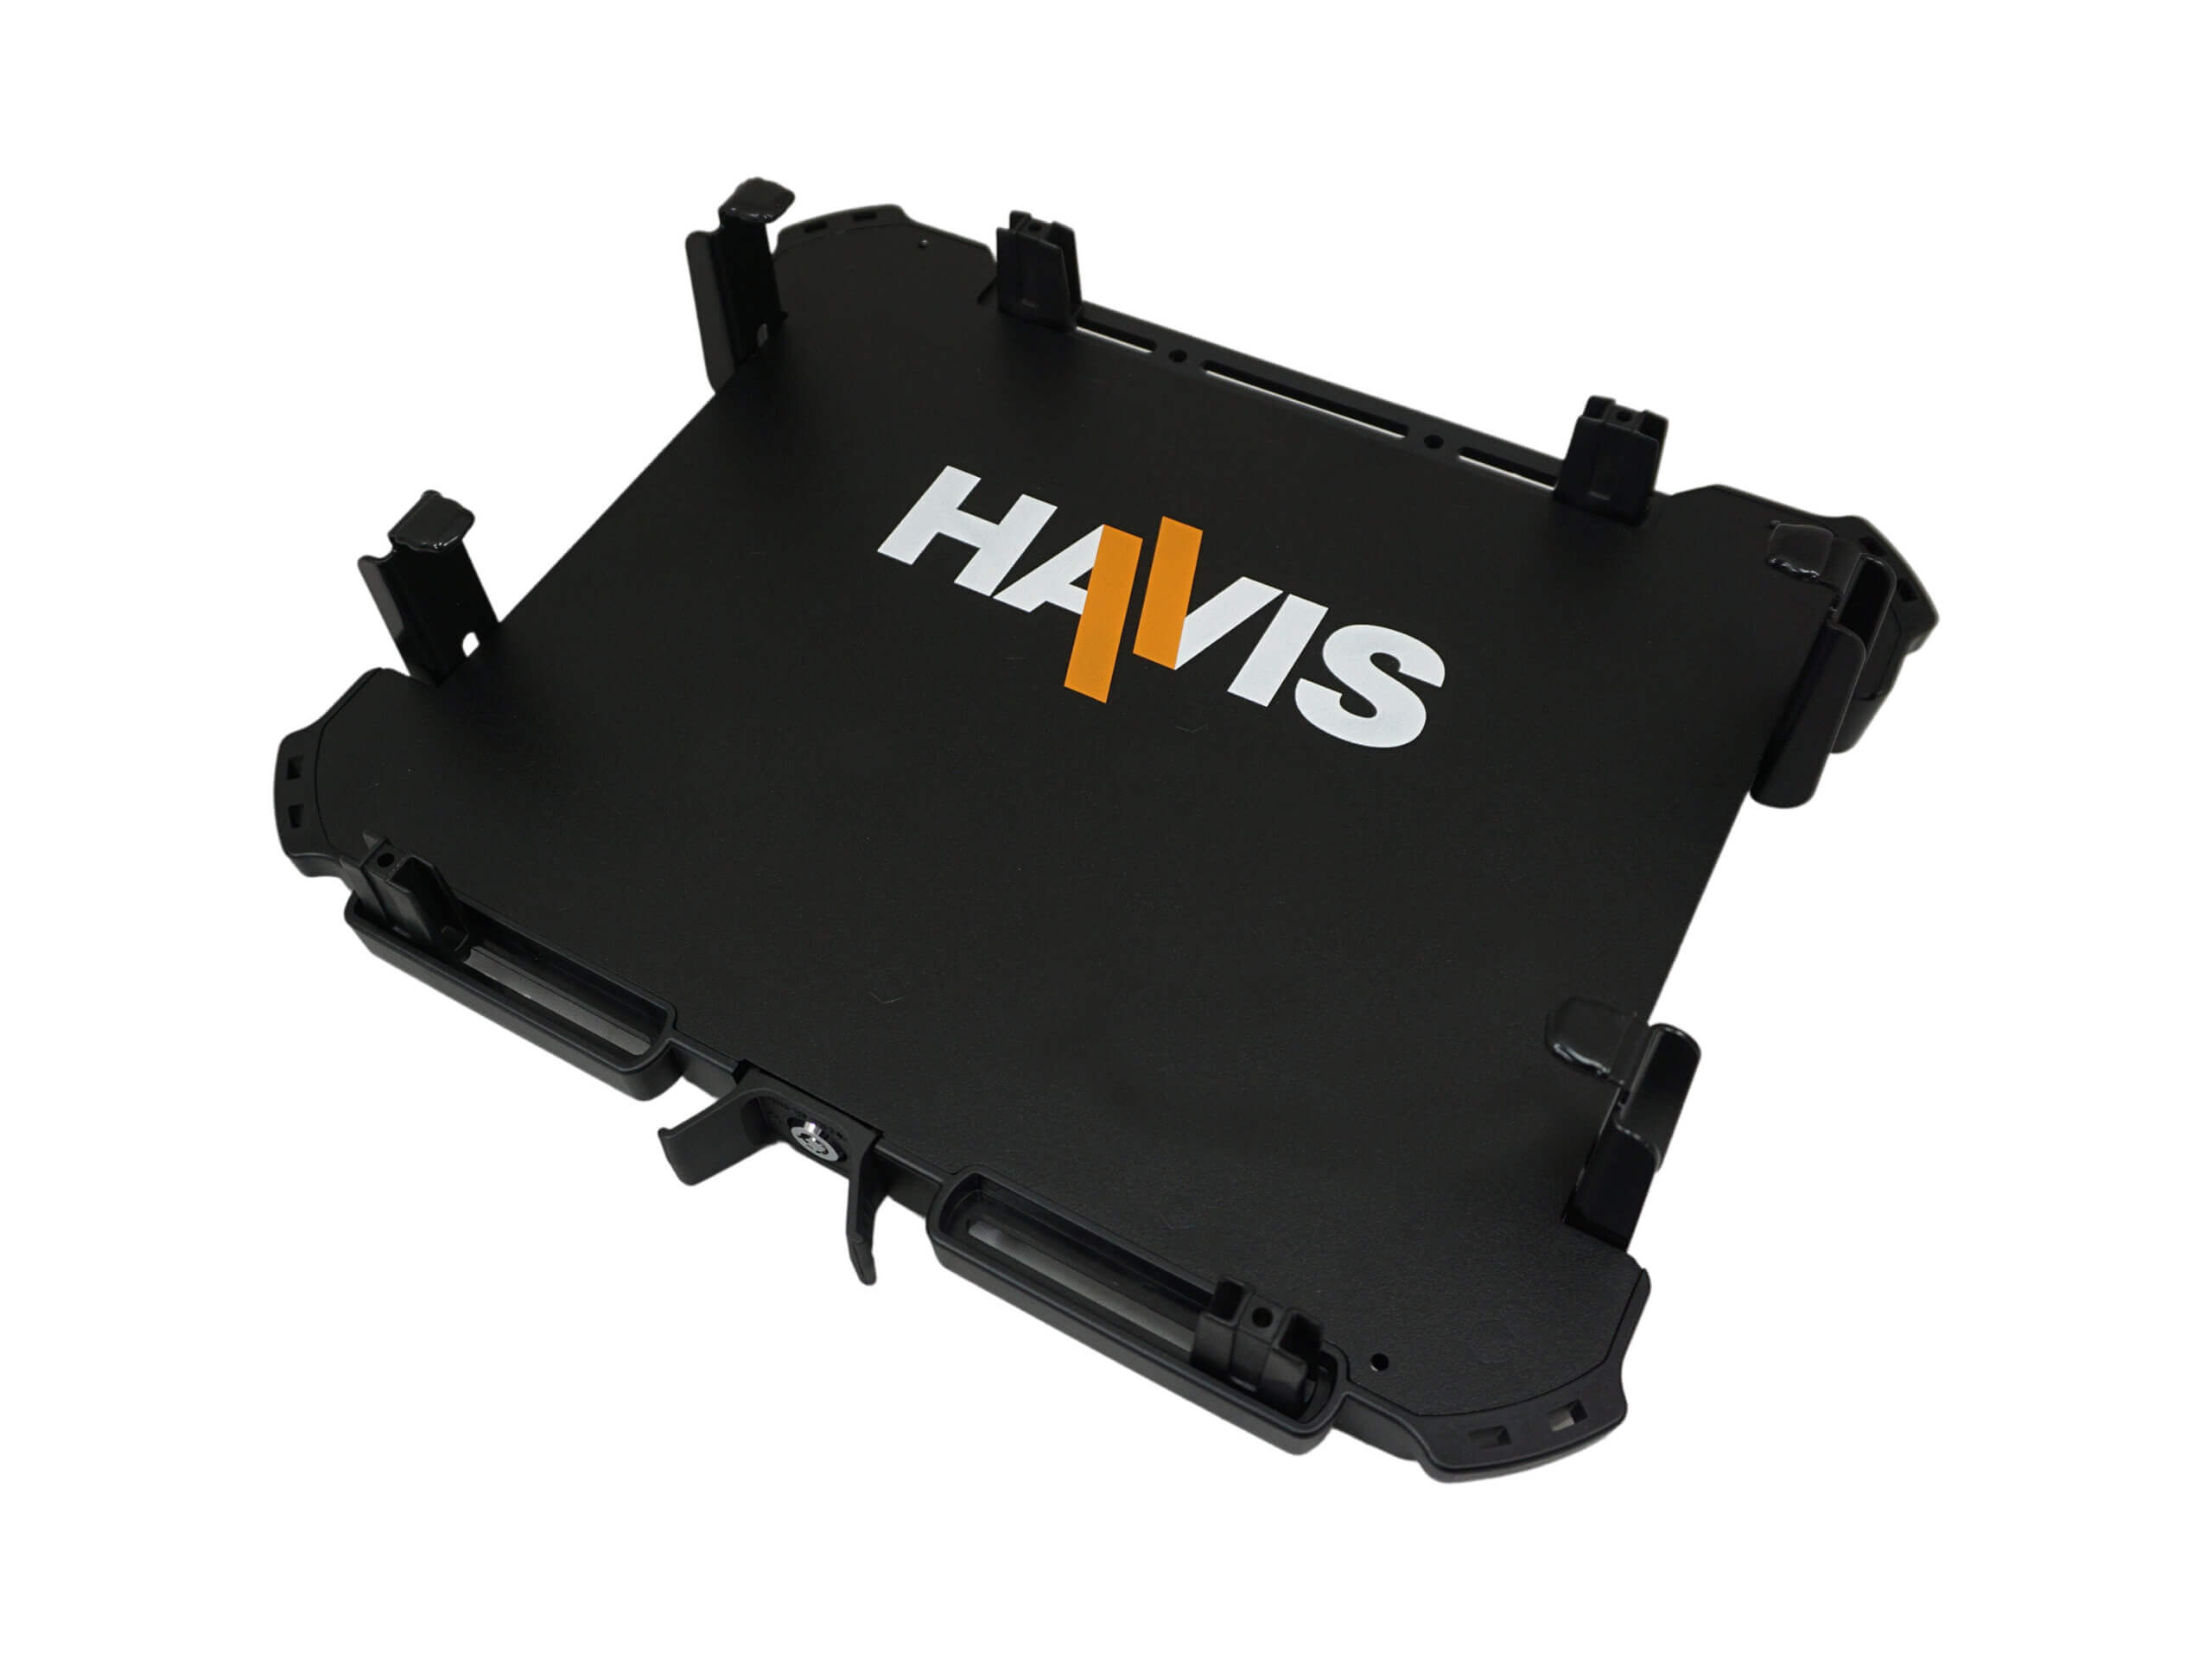 Universal Rugged Cradle for approximately 11″-14″ Computing Devices, with Added Depth